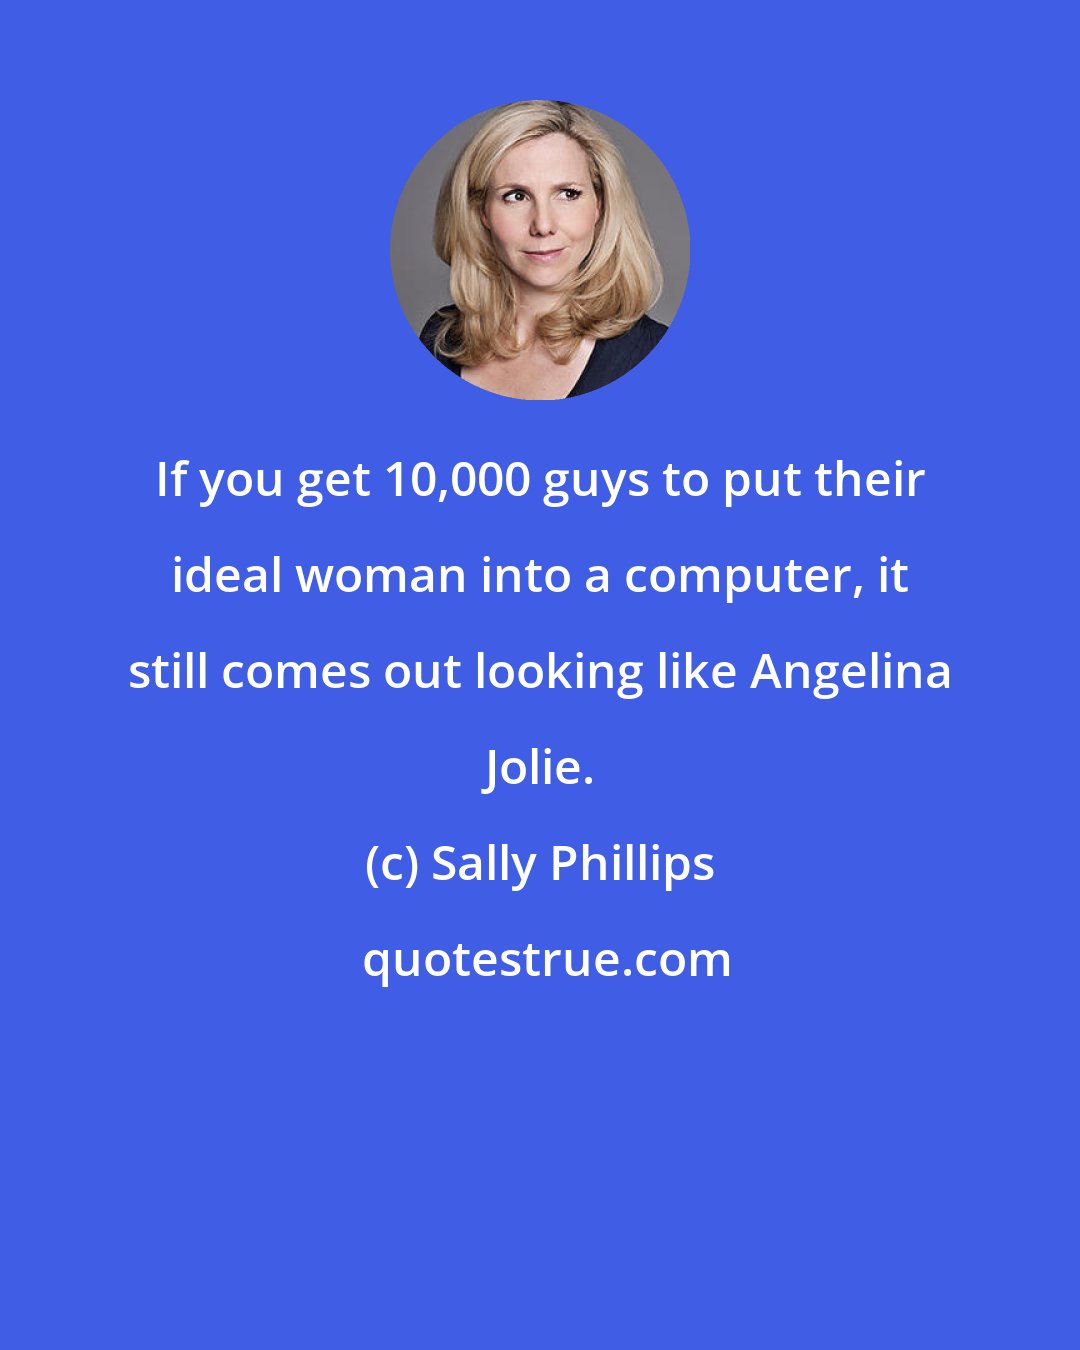 Sally Phillips: If you get 10,000 guys to put their ideal woman into a computer, it still comes out looking like Angelina Jolie.